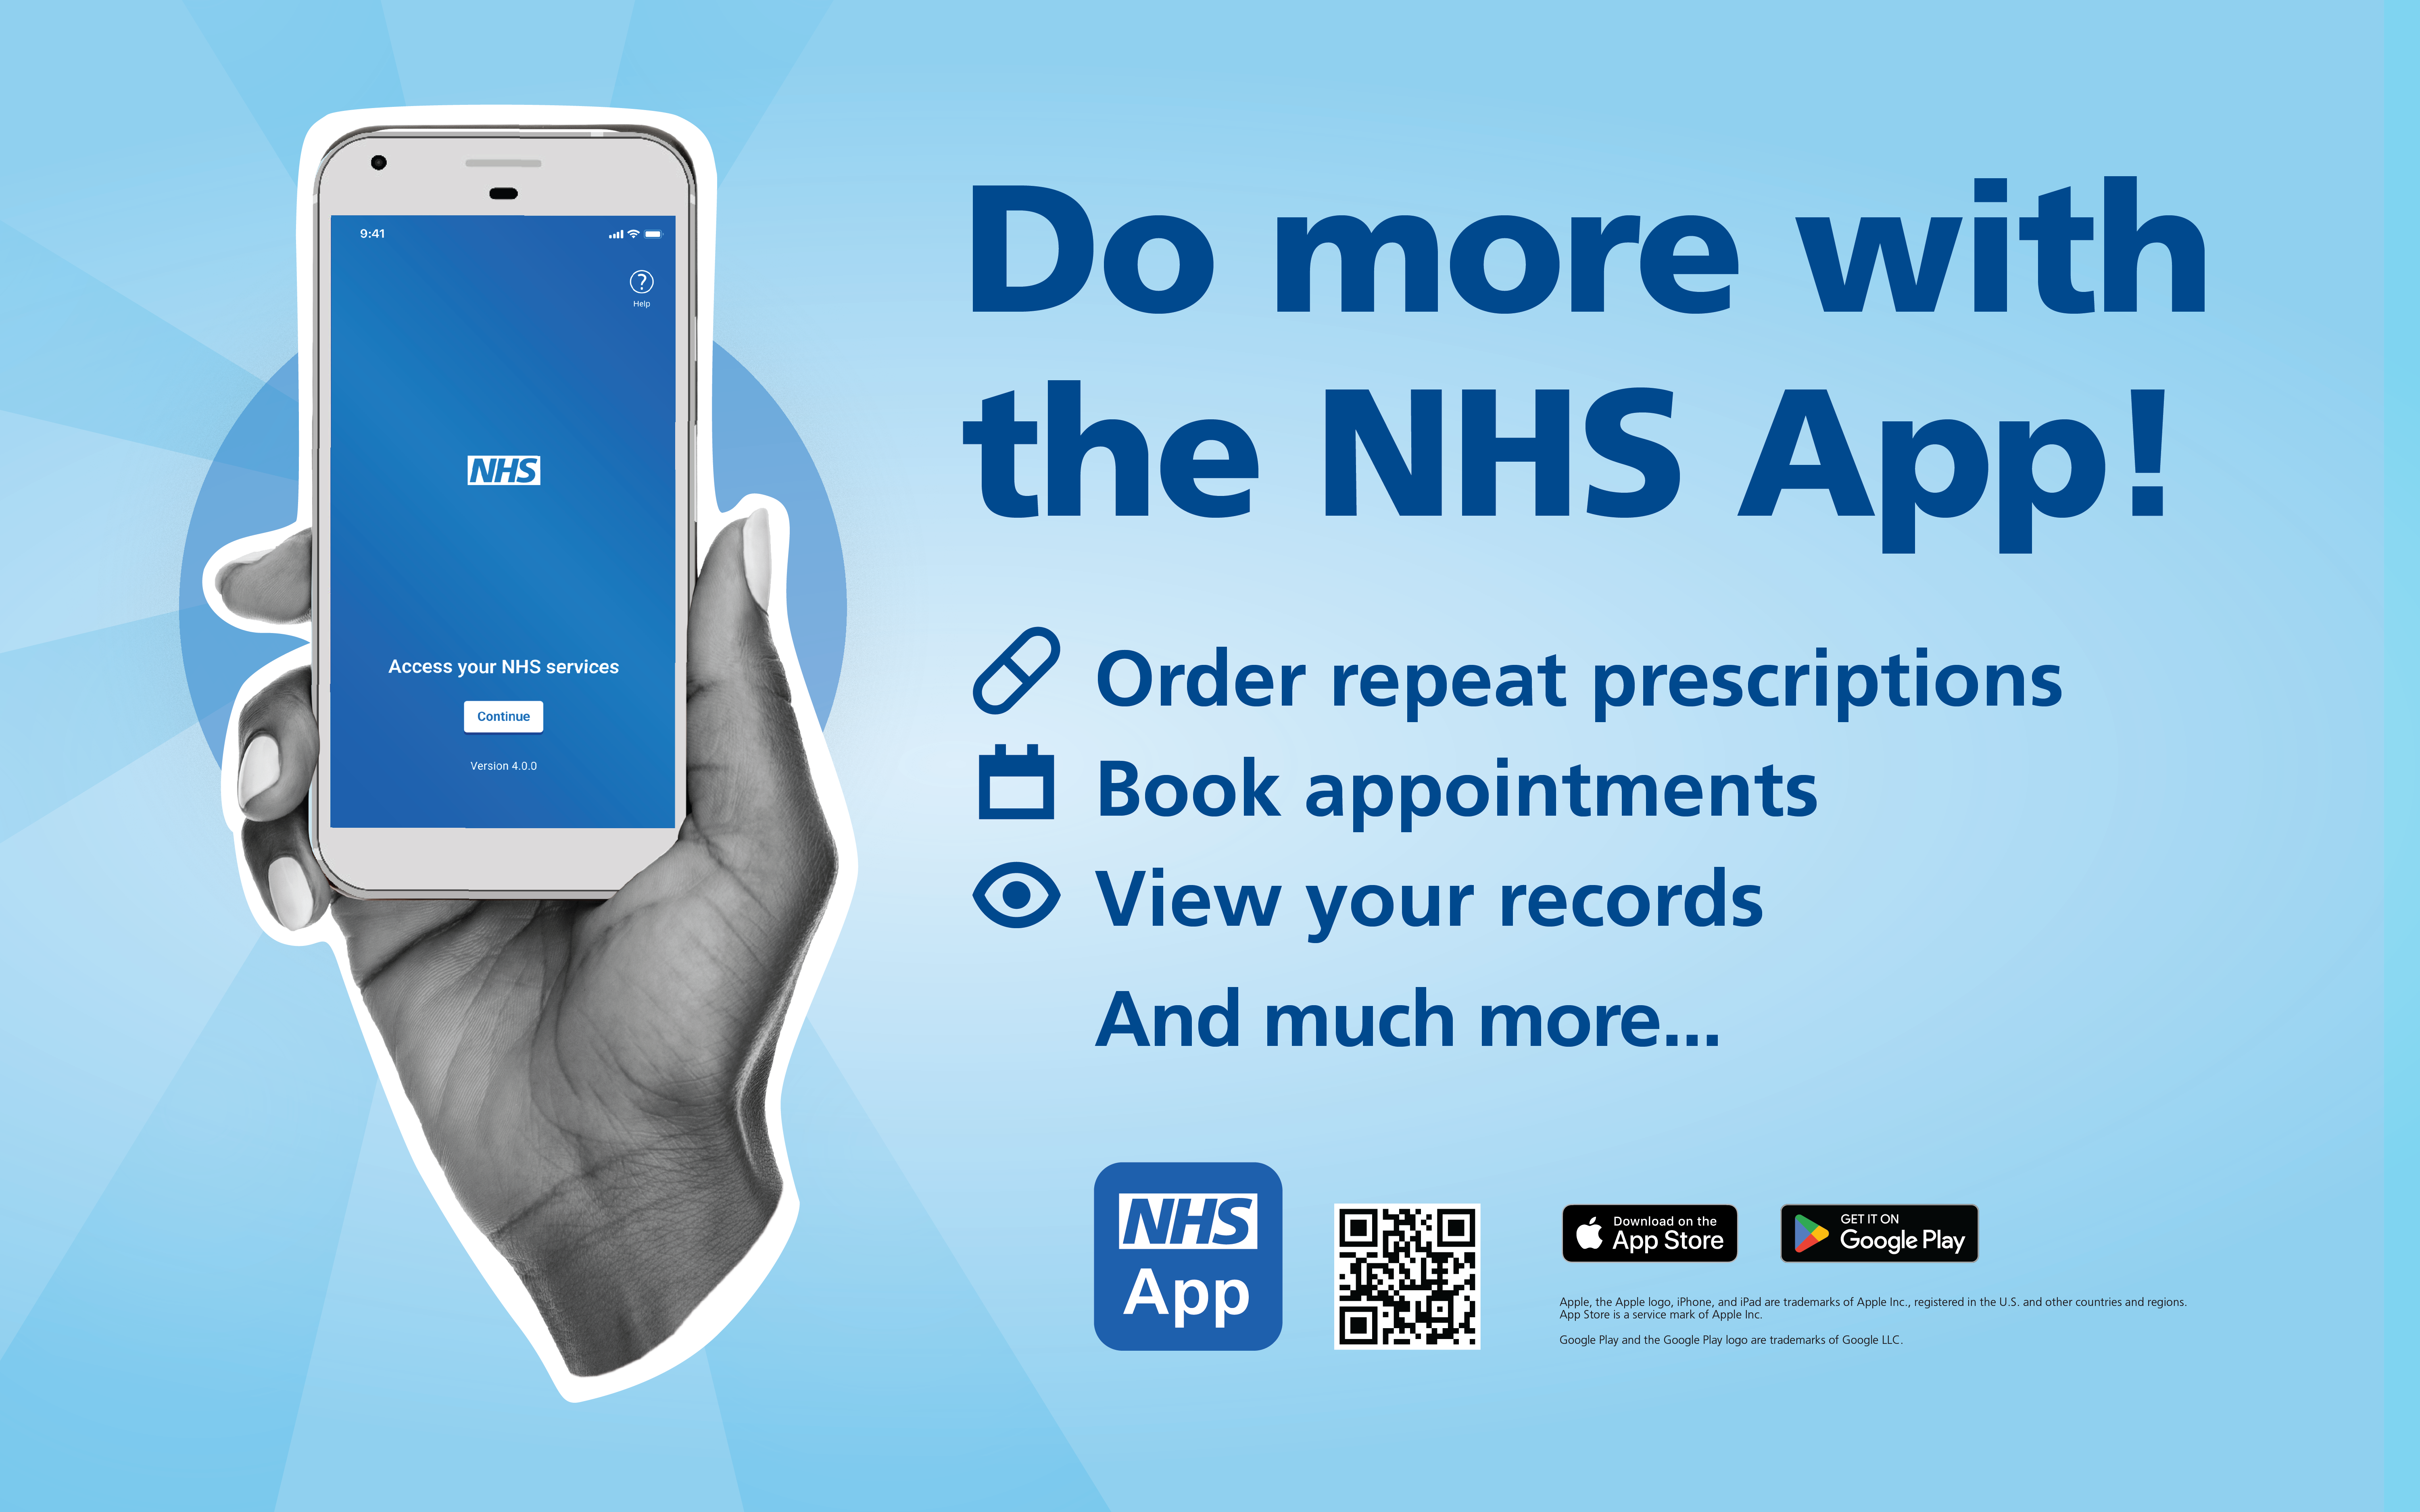 DO MORE WITH THE NHS APP